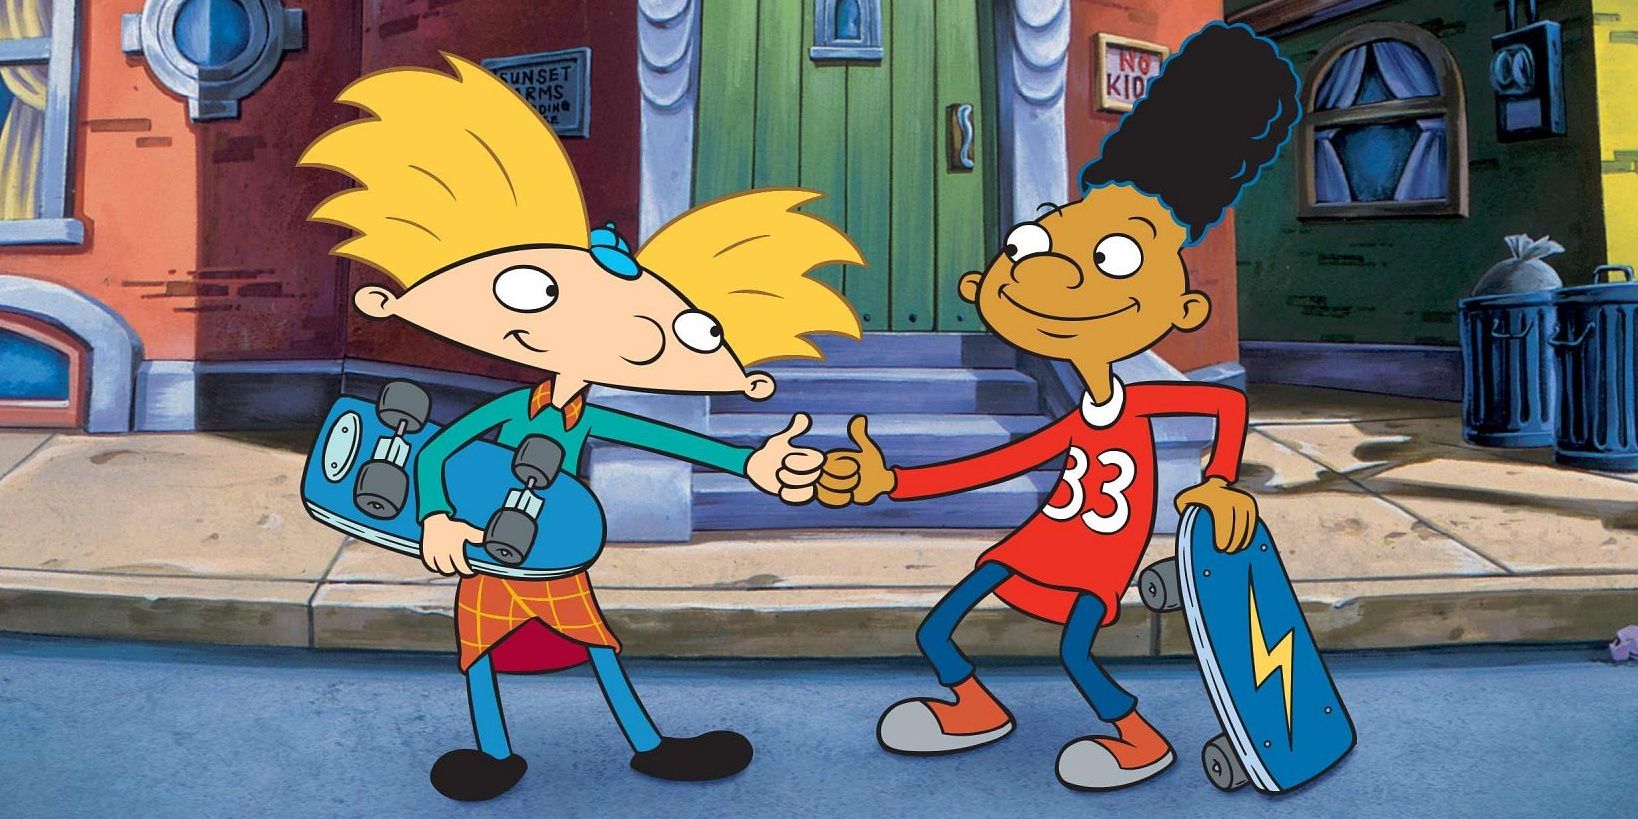 Hey Arnold - Arnold and Gerald do their handshake